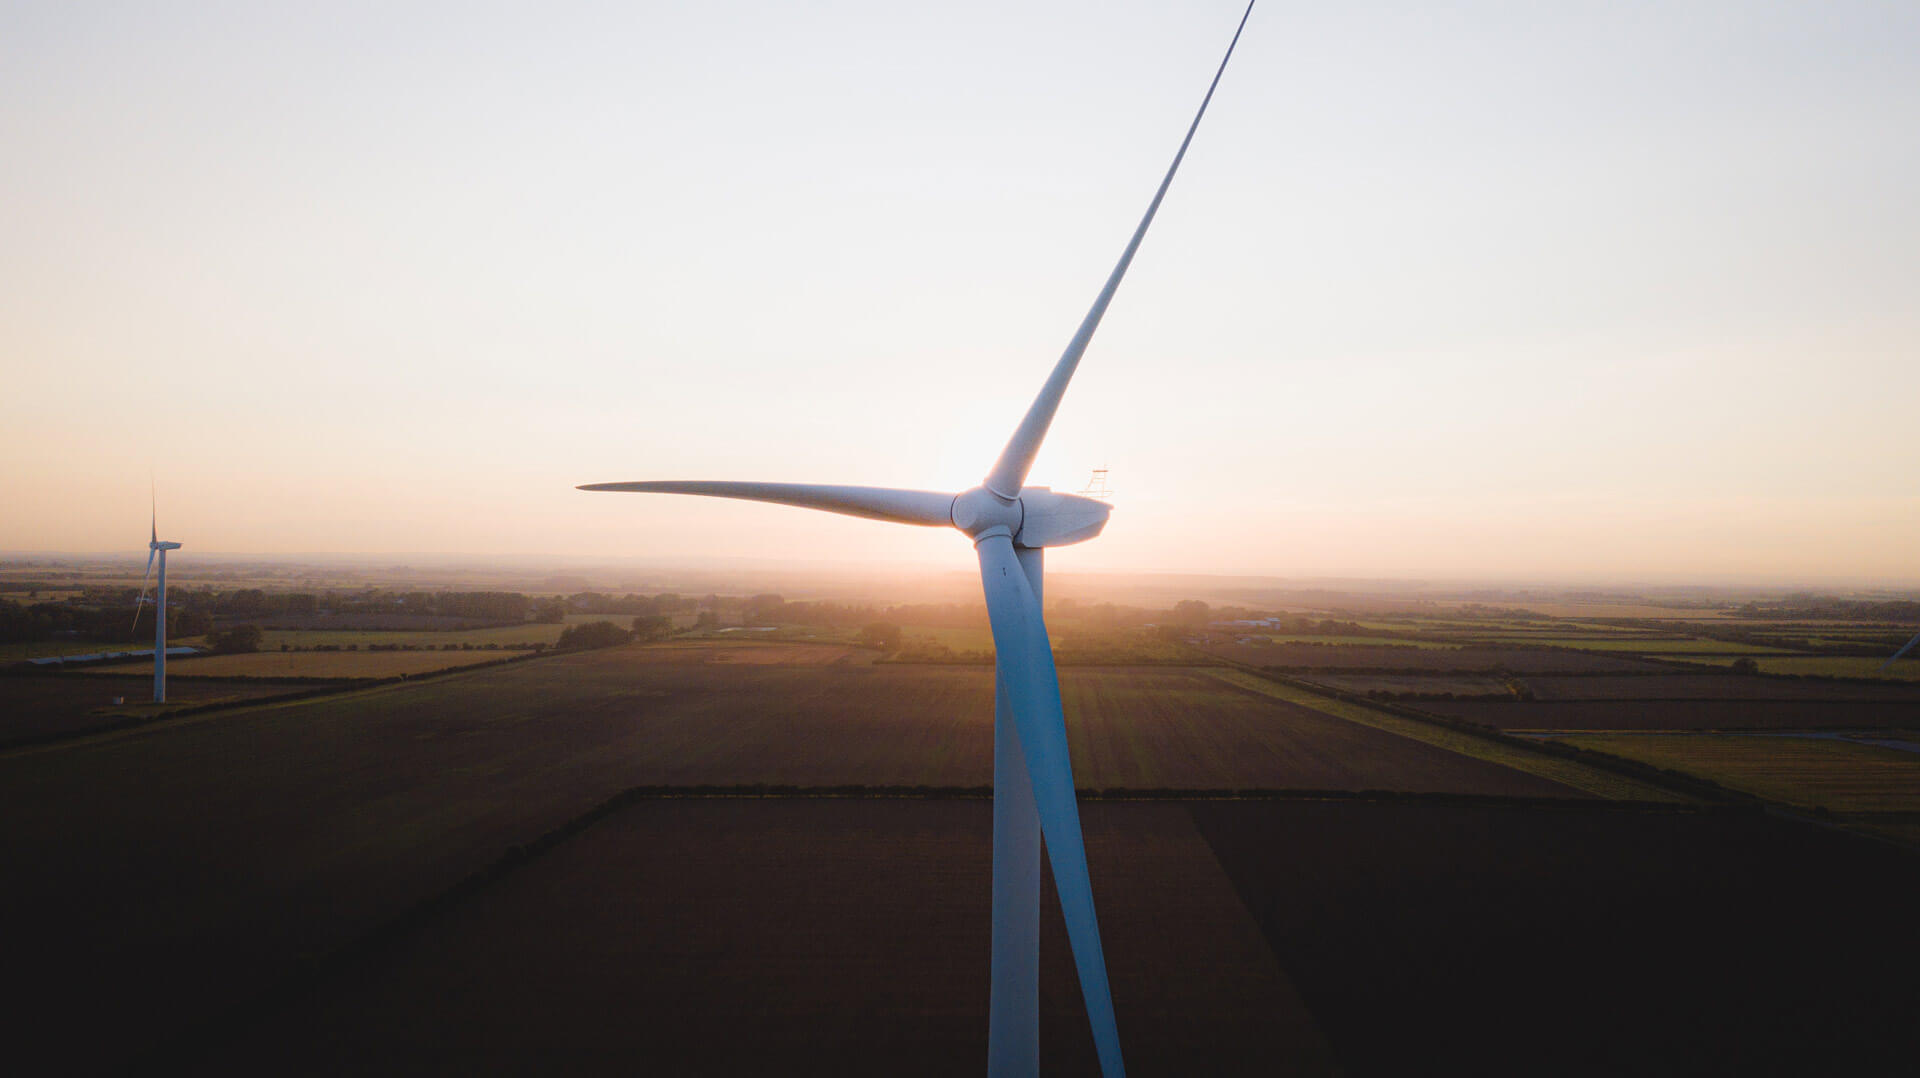 Close-up image of wind turbine blades against the sunrise over a farm field.